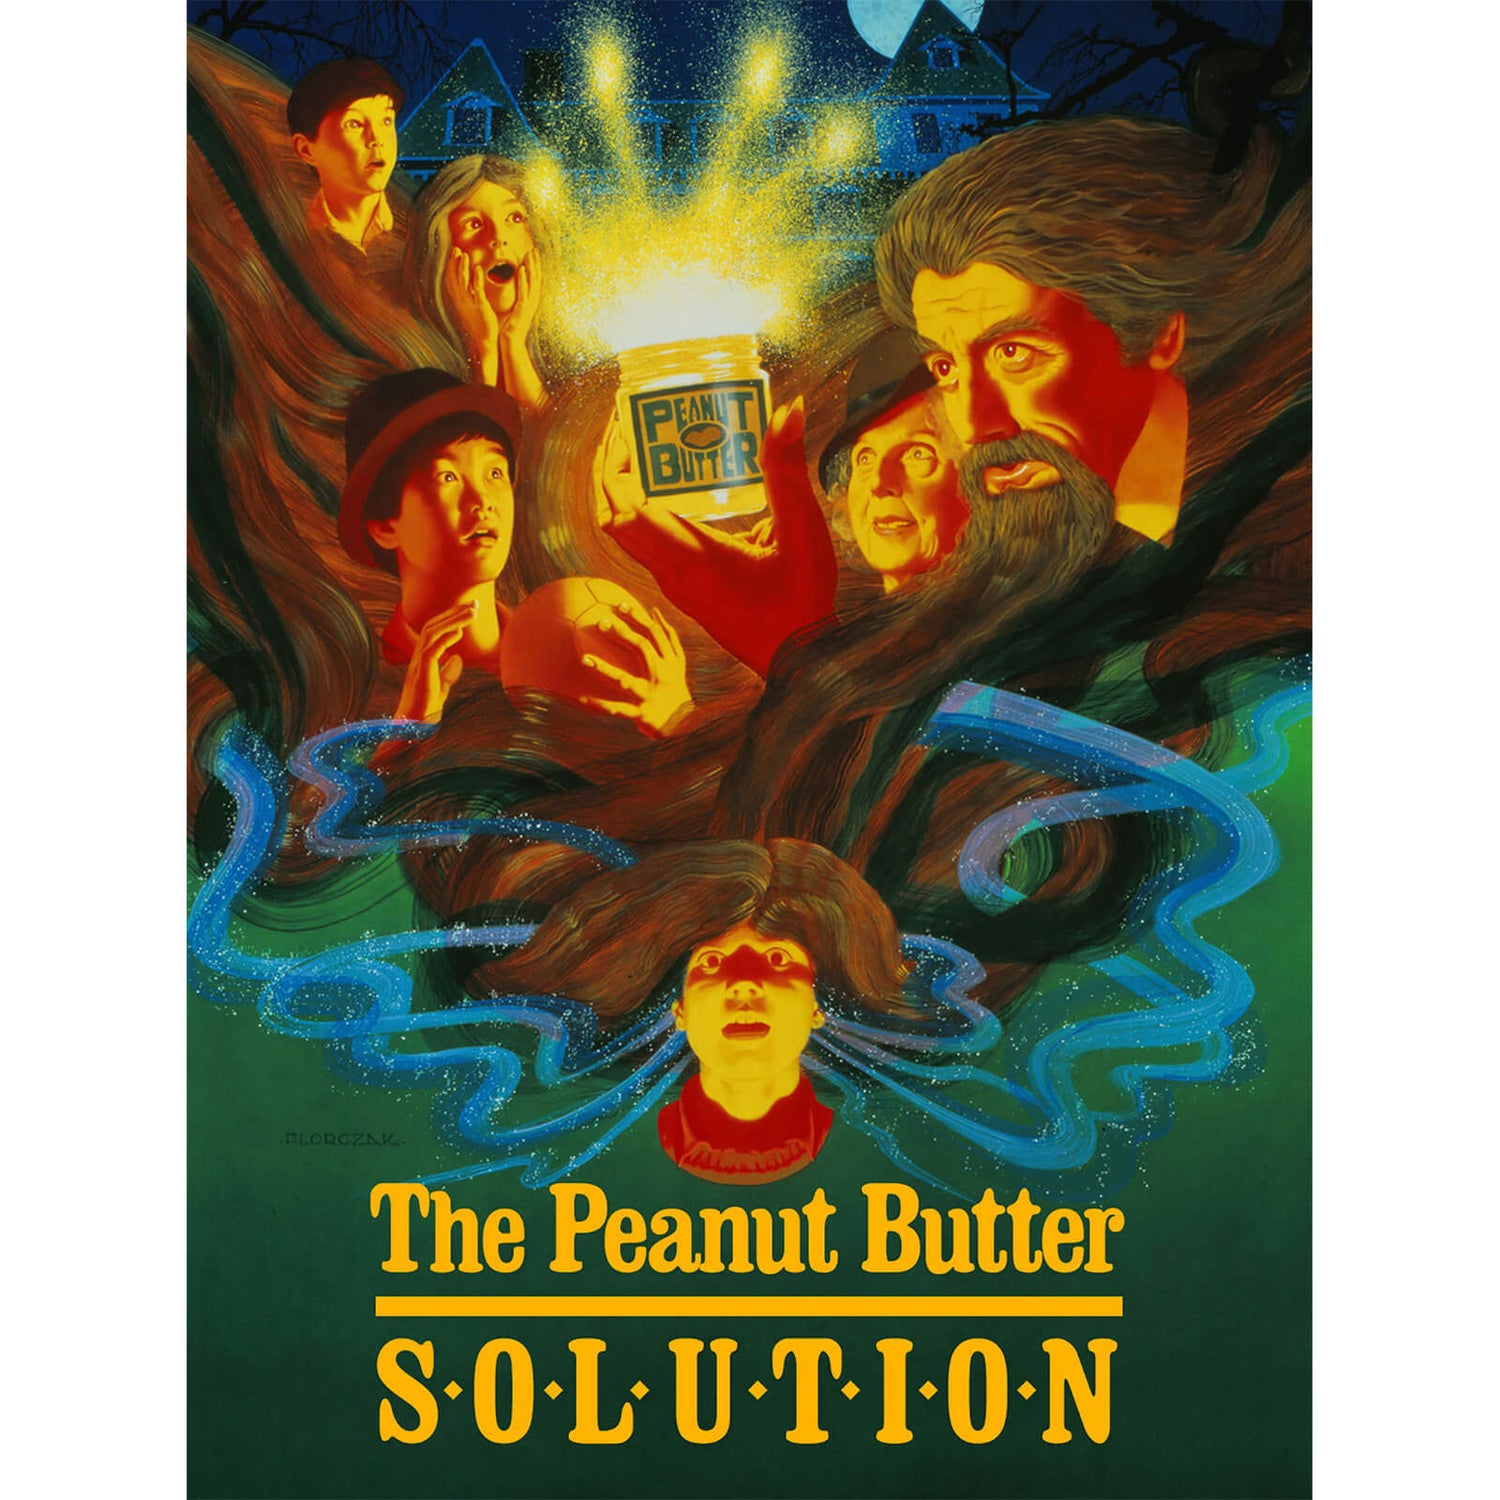 The Peanut Butter Solution (US Import)